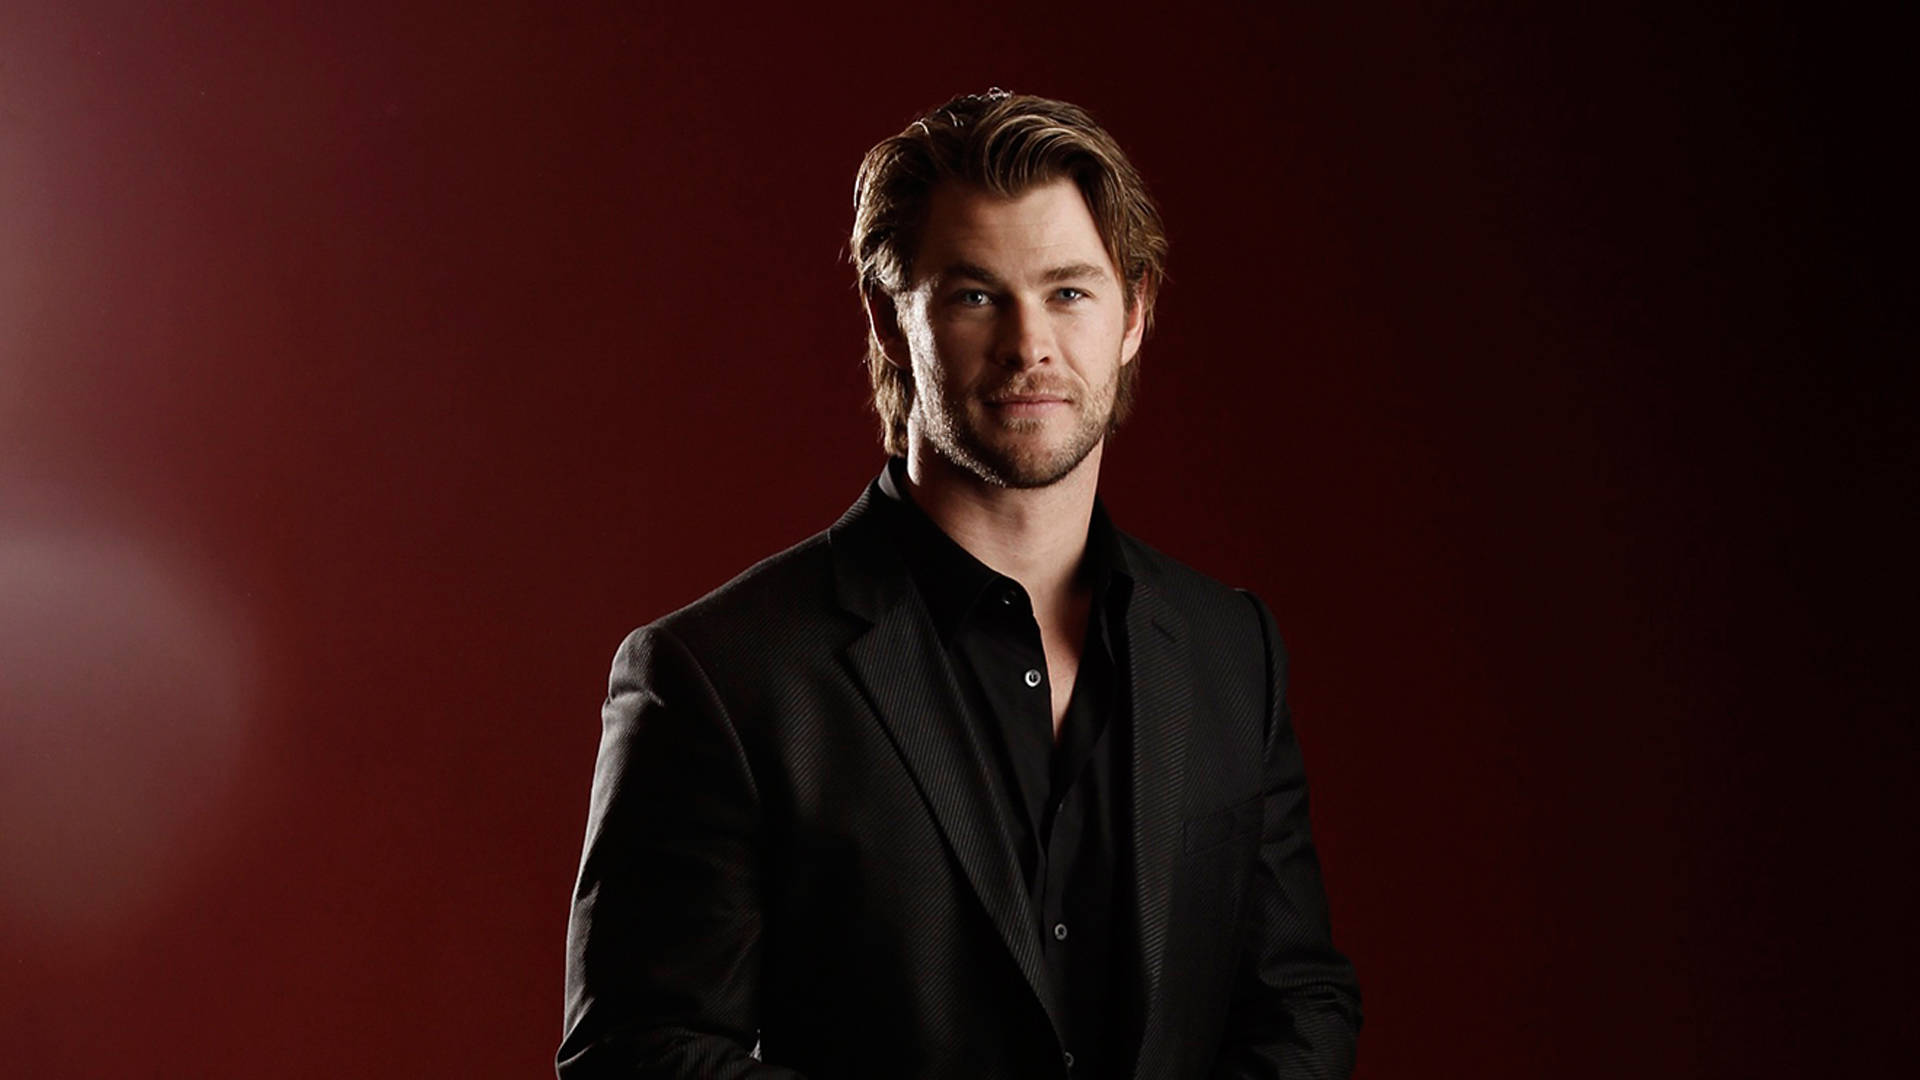 Chris Hemsworth In A Black Formal Outfit Background